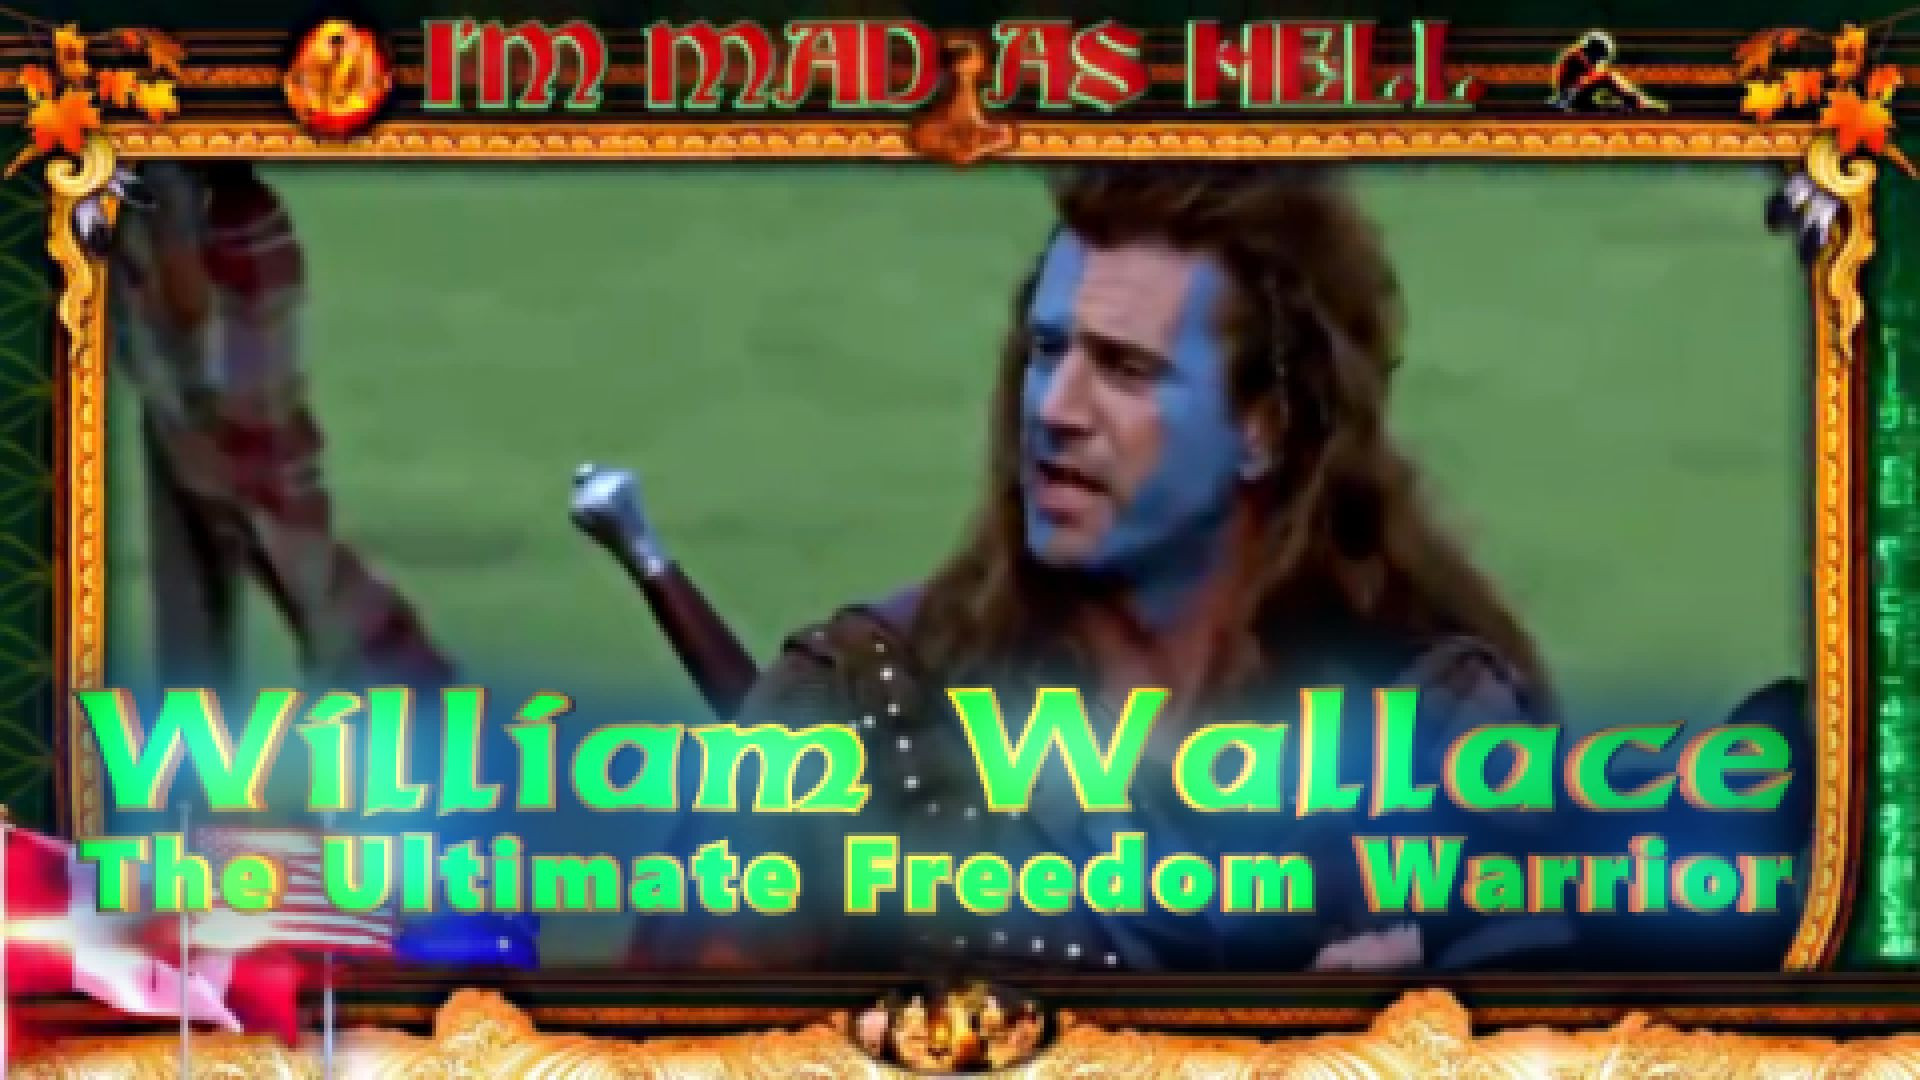 William Wallace the Braveheart Freedom Warrior (revised)